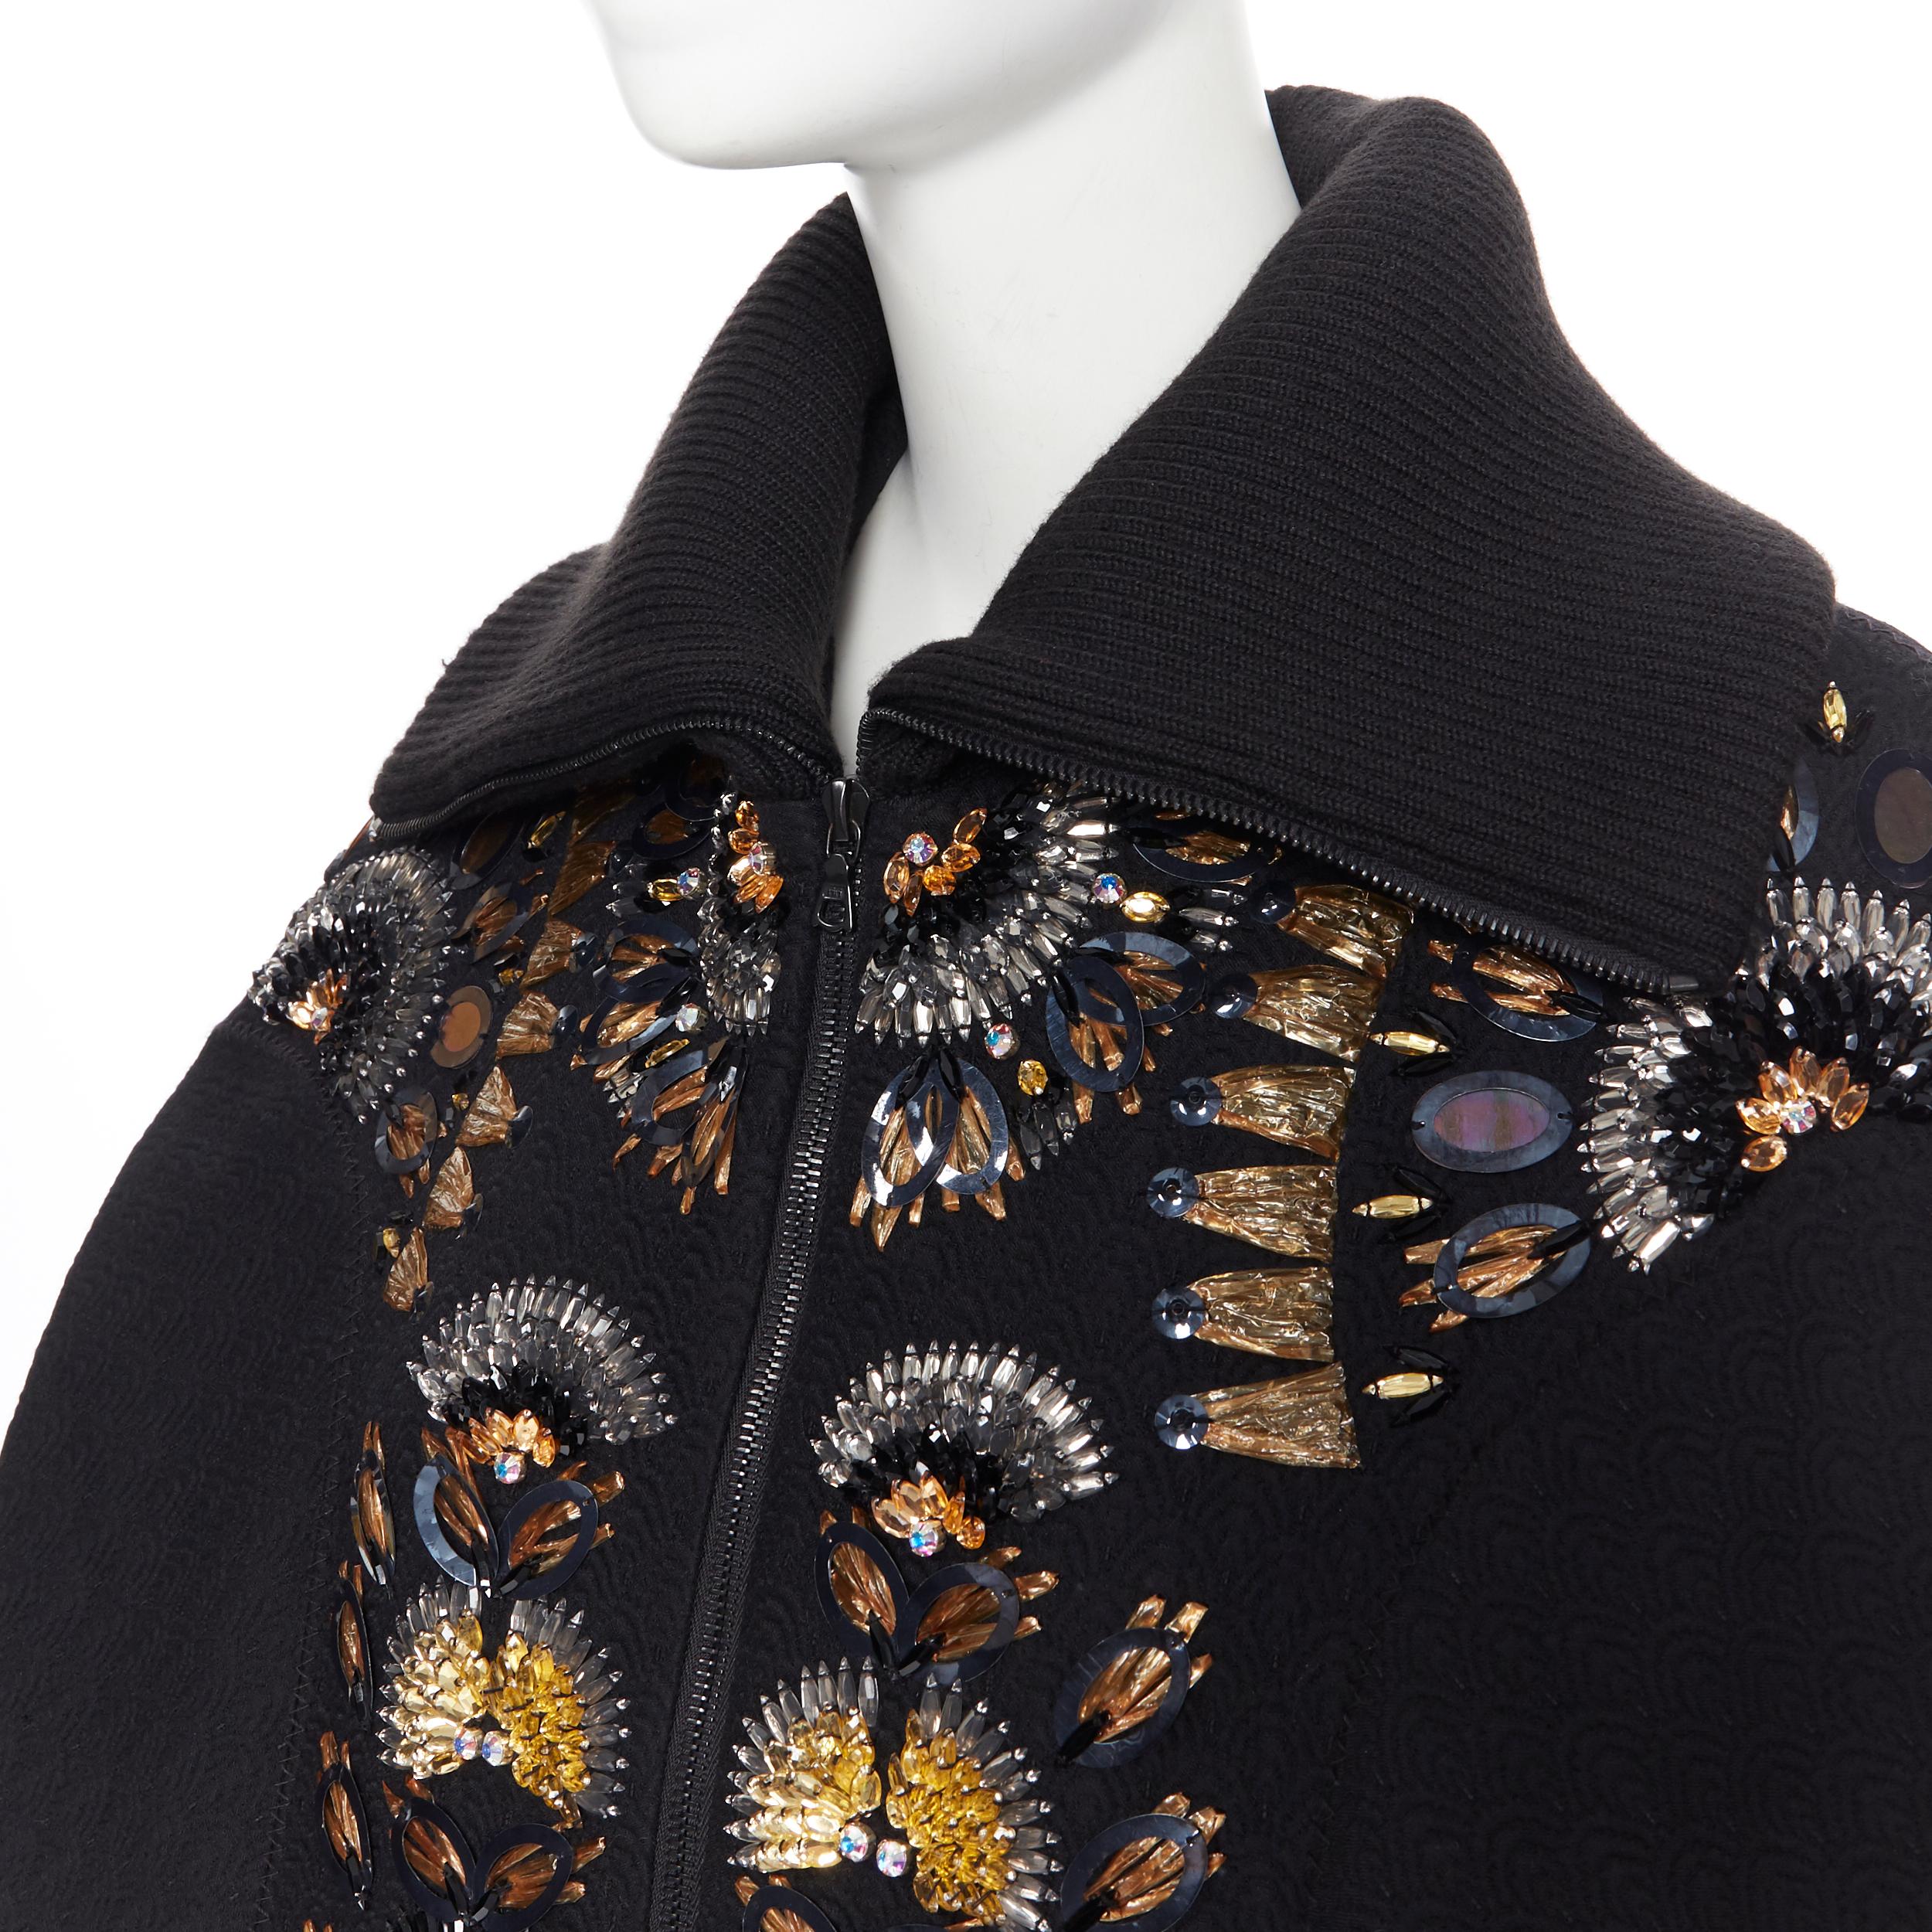 new DRIES VAN NOTEN Veloria black oriental jacquard crystal embellished bomber S
Brand: Dries Van Noten
Designer: Dries Van Noten
Collection: Fall Winter 2018
Model Name / Style: Bomber jacket
Material: Acrylic blend
Color: Black
Pattern: